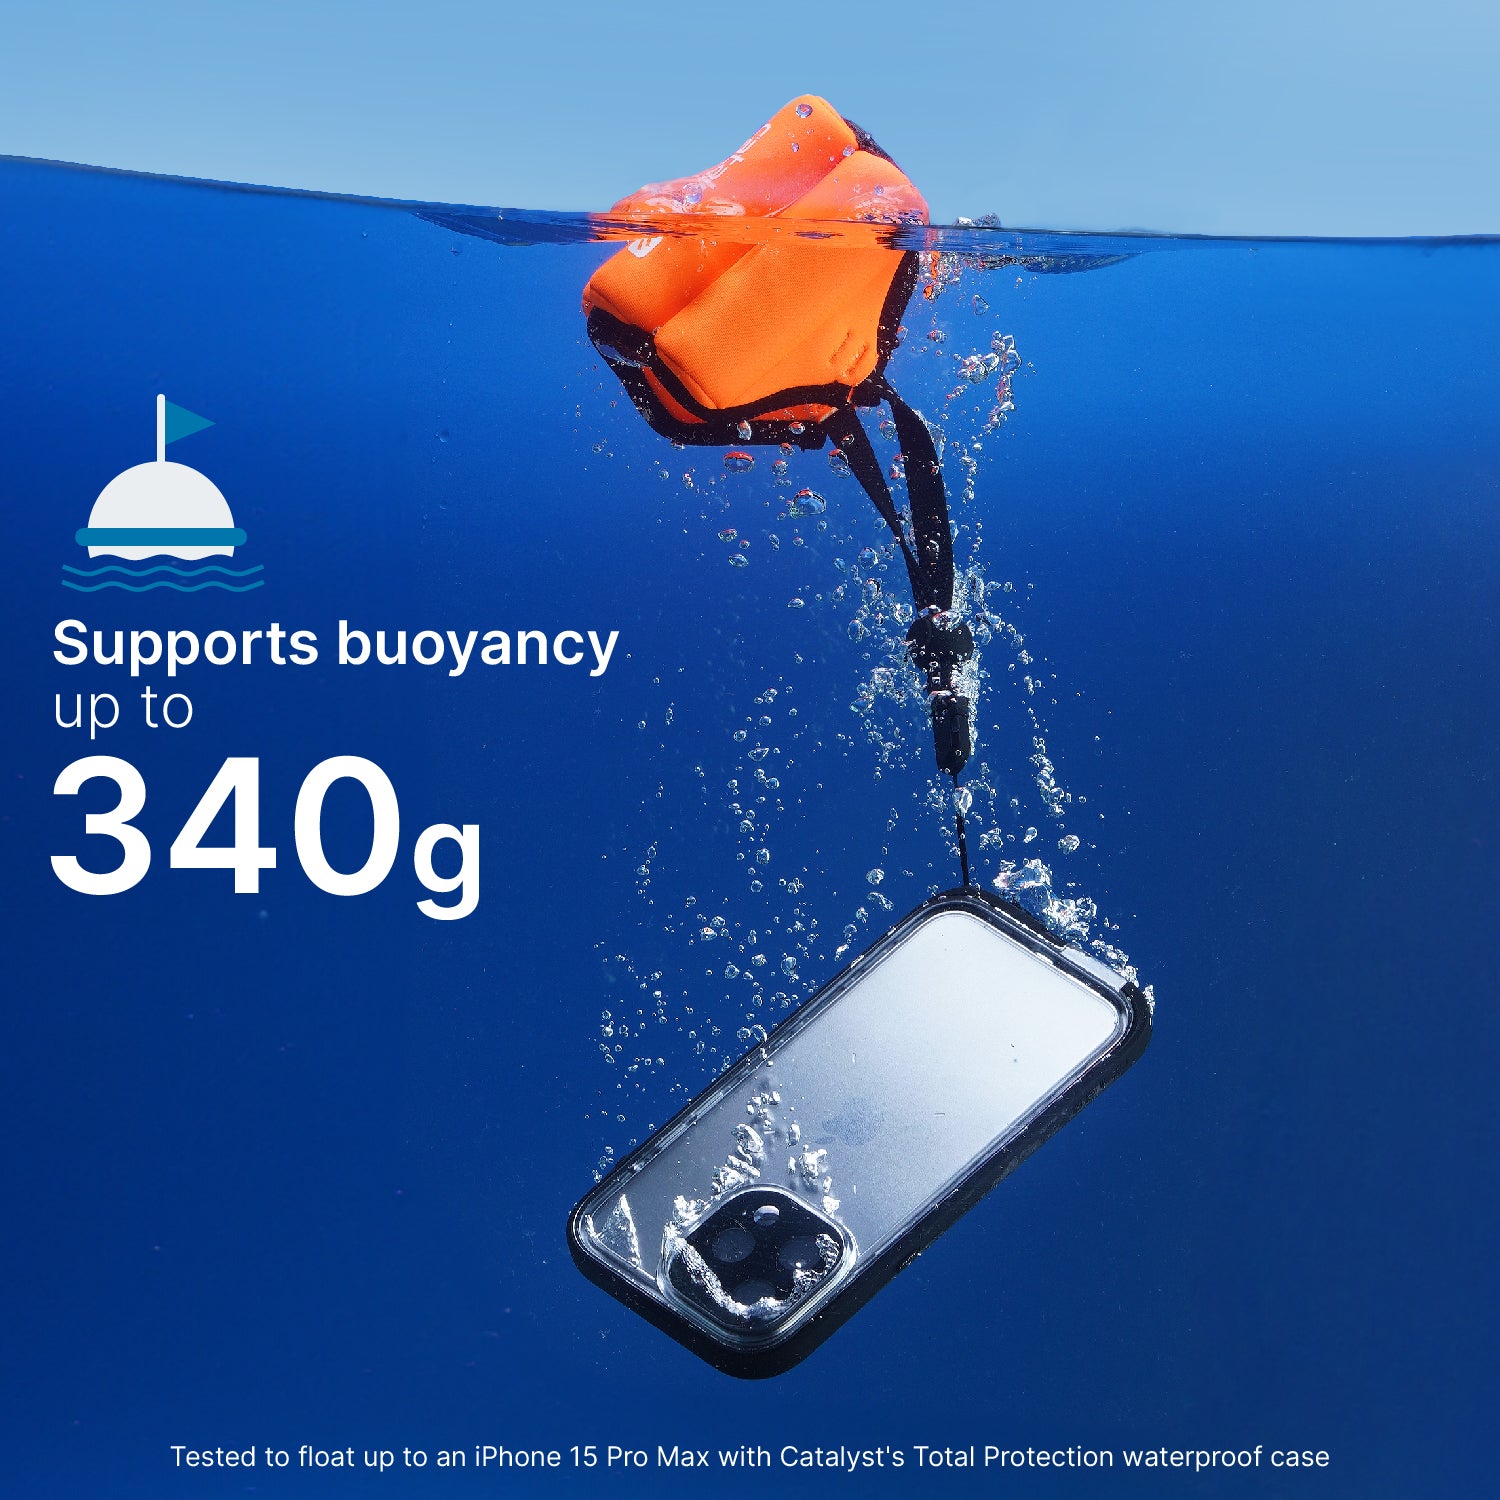 Catalyst Orange Wrist Floating Lanyard attached to waterproof case for iPhone supports buoyancy up to 340g